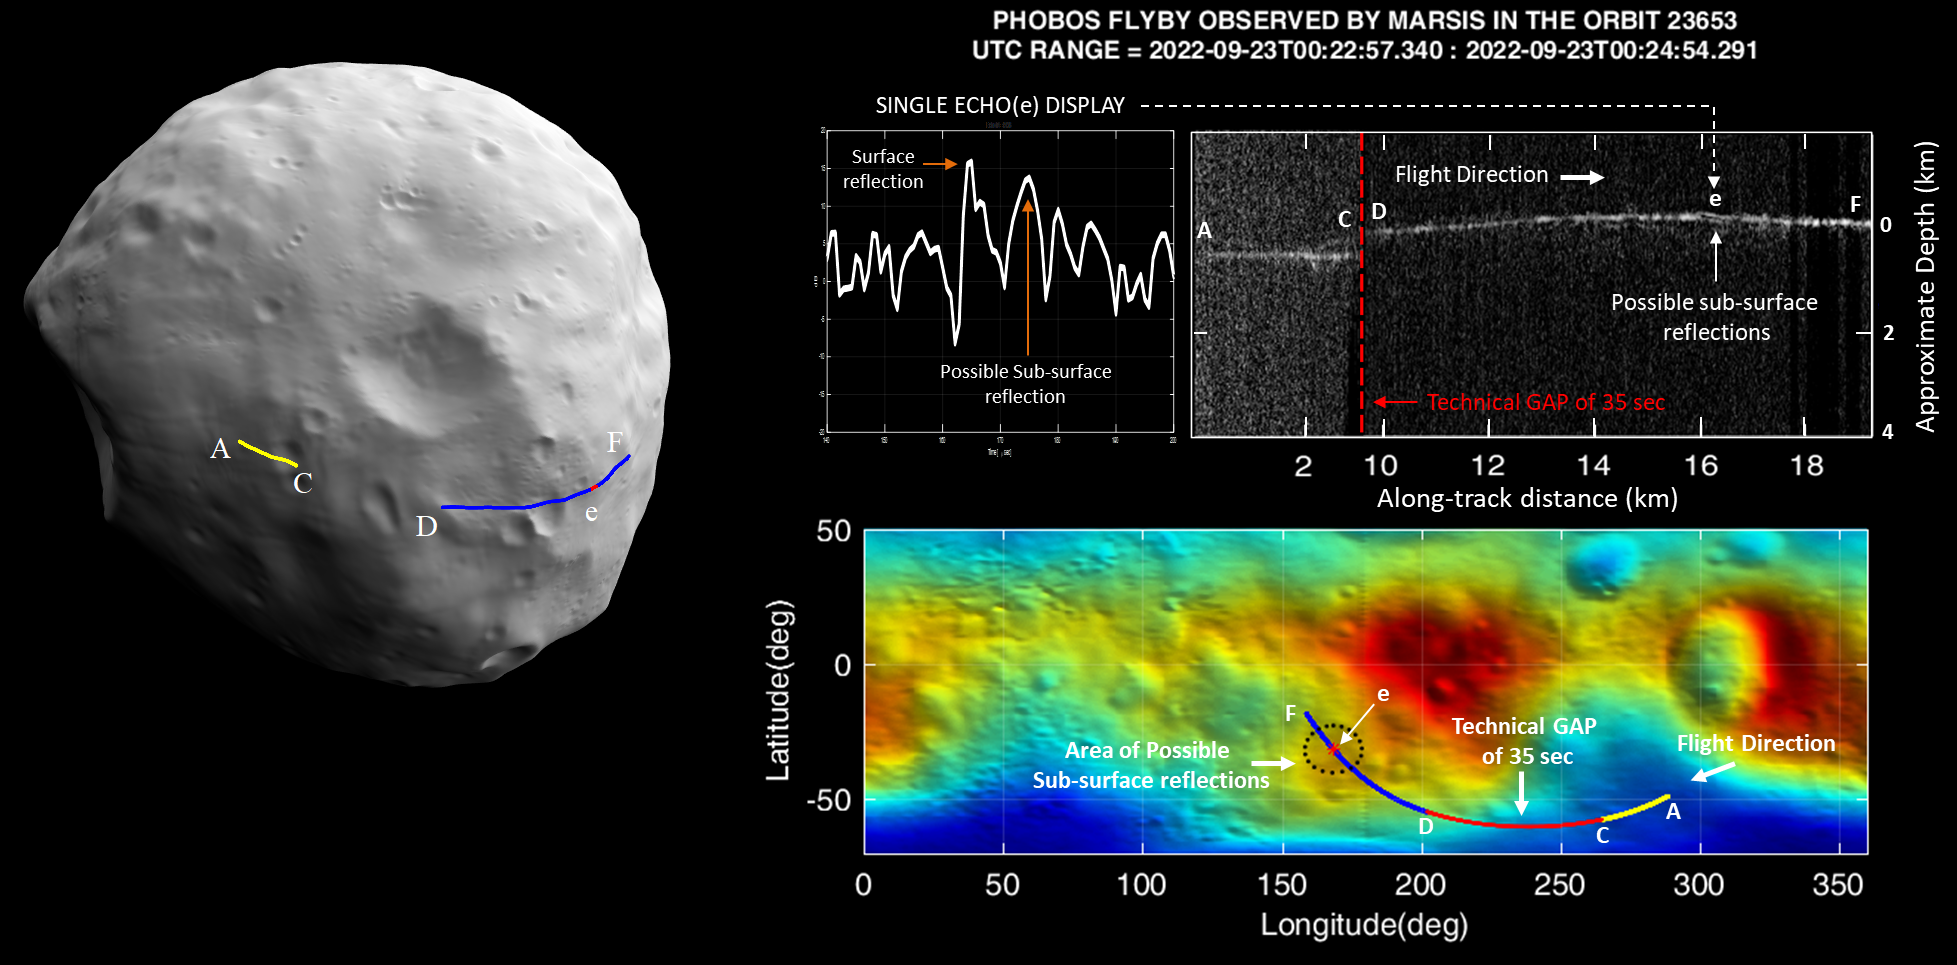 The Mars Express just got up close and personal with Phobos